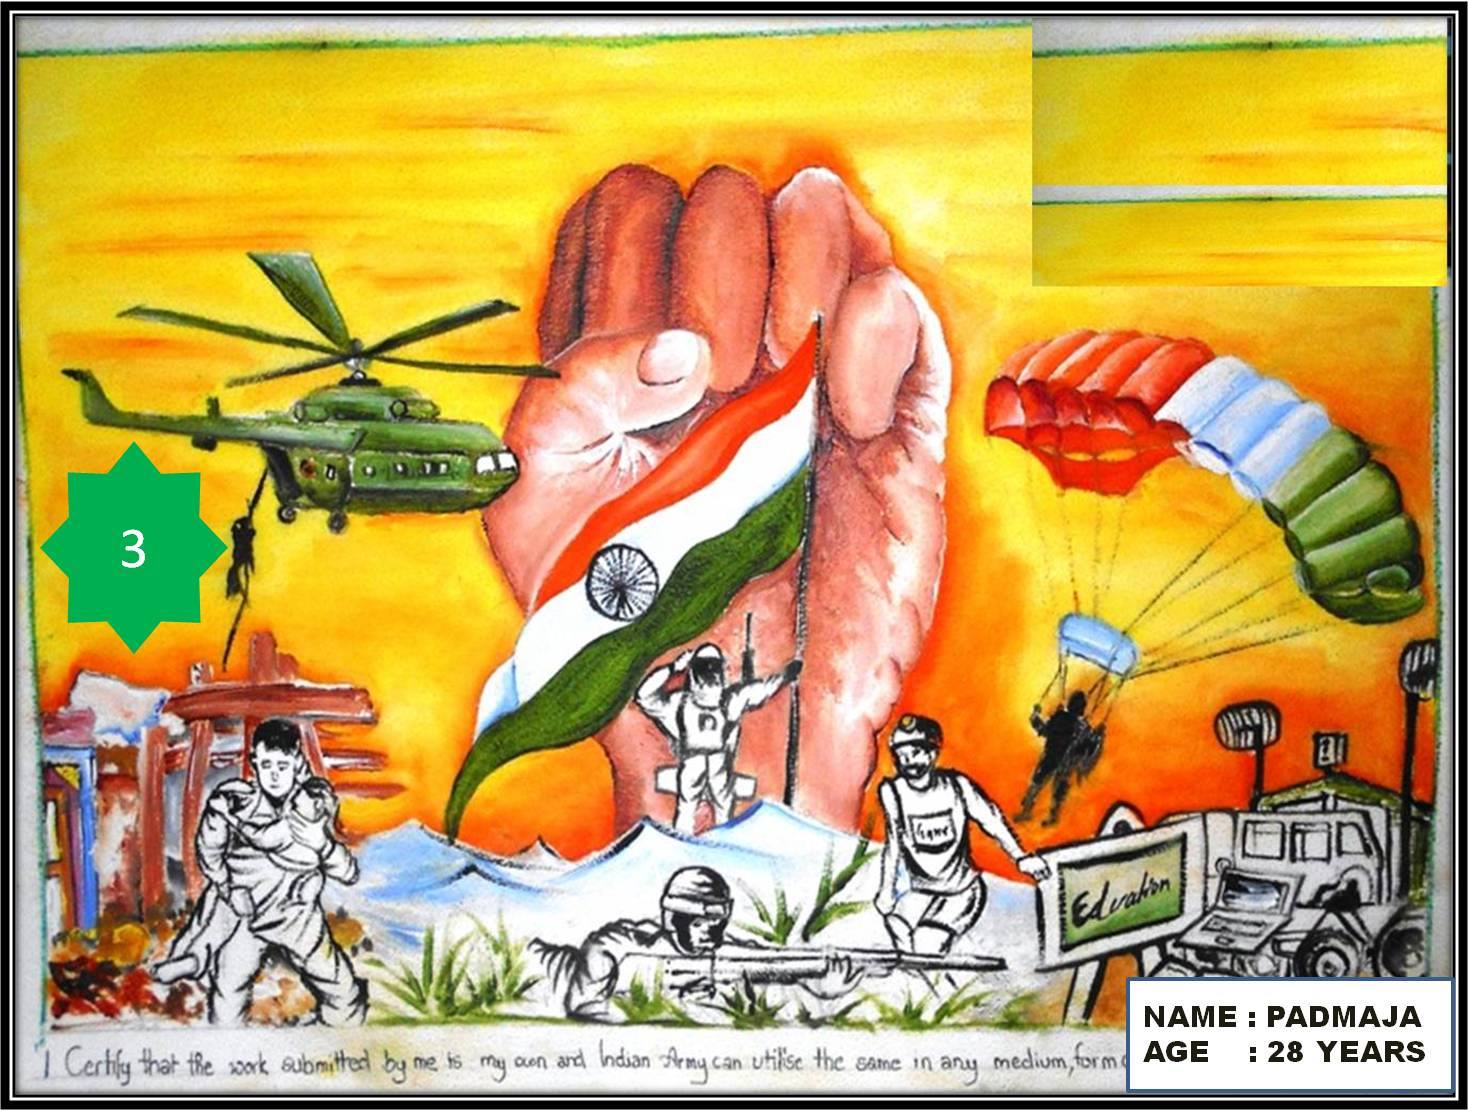 KALAKAR - An initiative to educate young children about the value of the Indian  Army